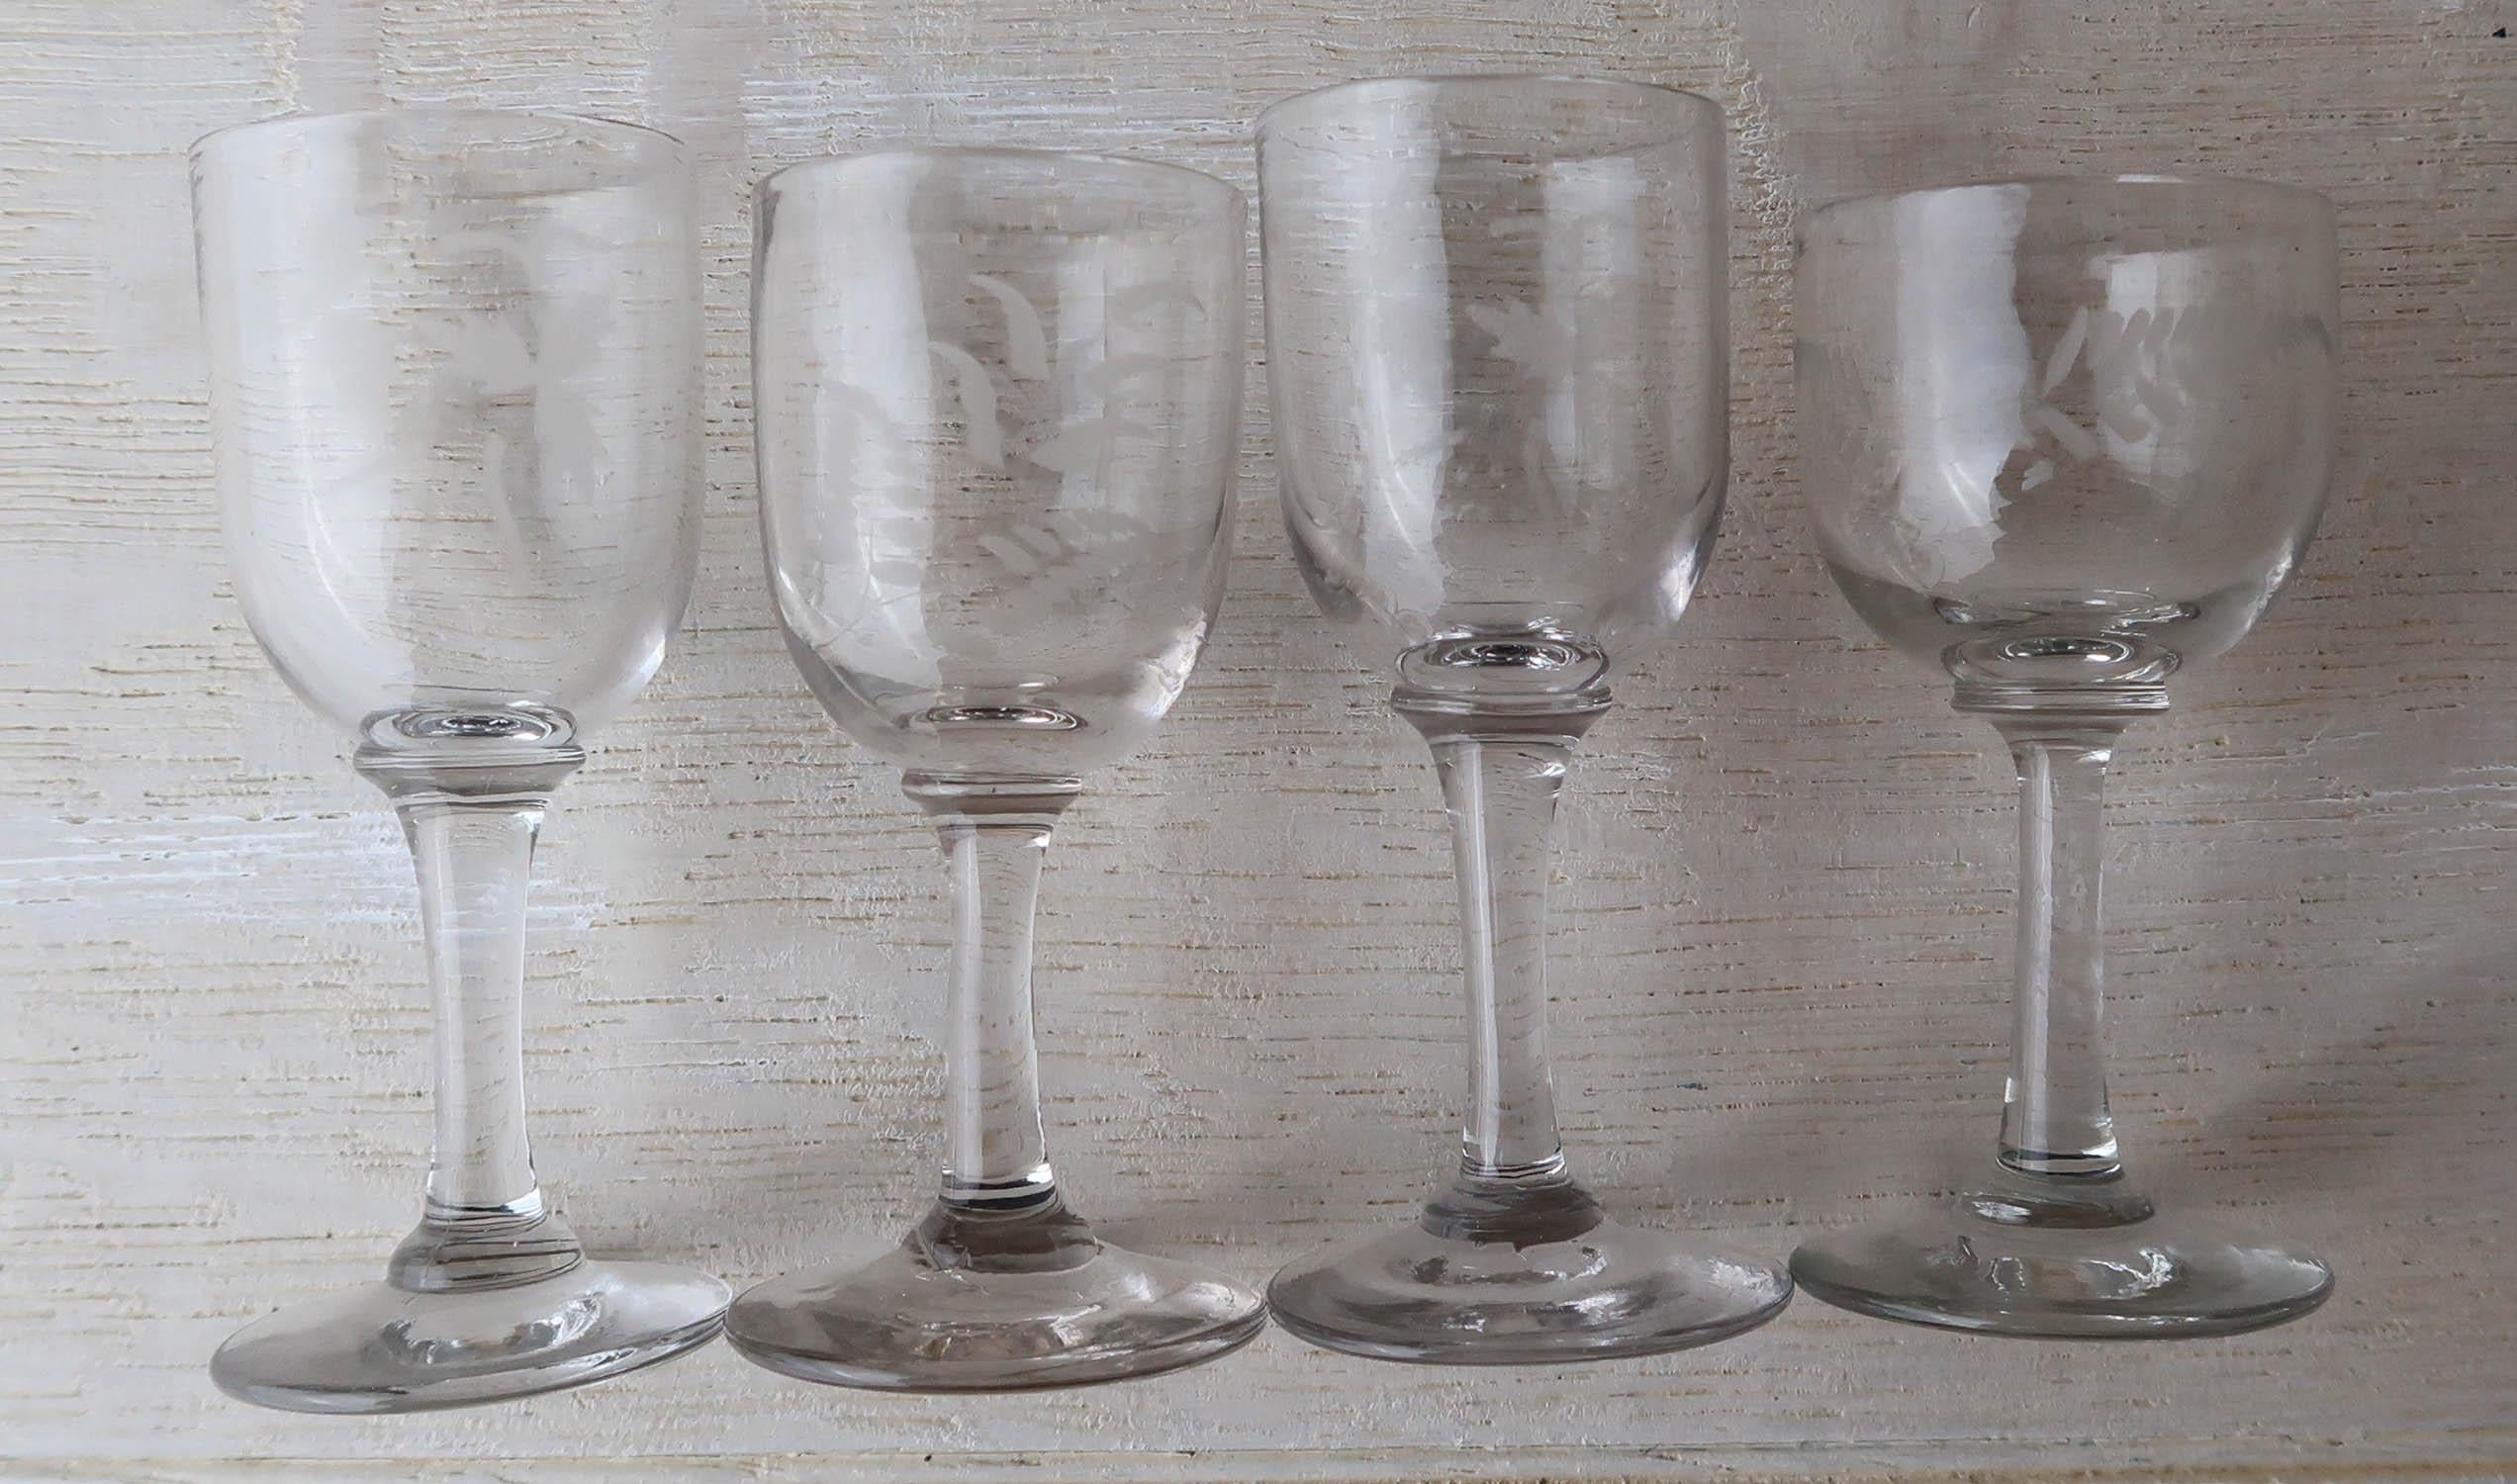 Nice collection of 4 glasses. All slightly different

Rather primitive with quite crude etching of ferns and other leaves

Polished pontil marks

The measurement relates to the largest of the four



Silver plated tray not included.